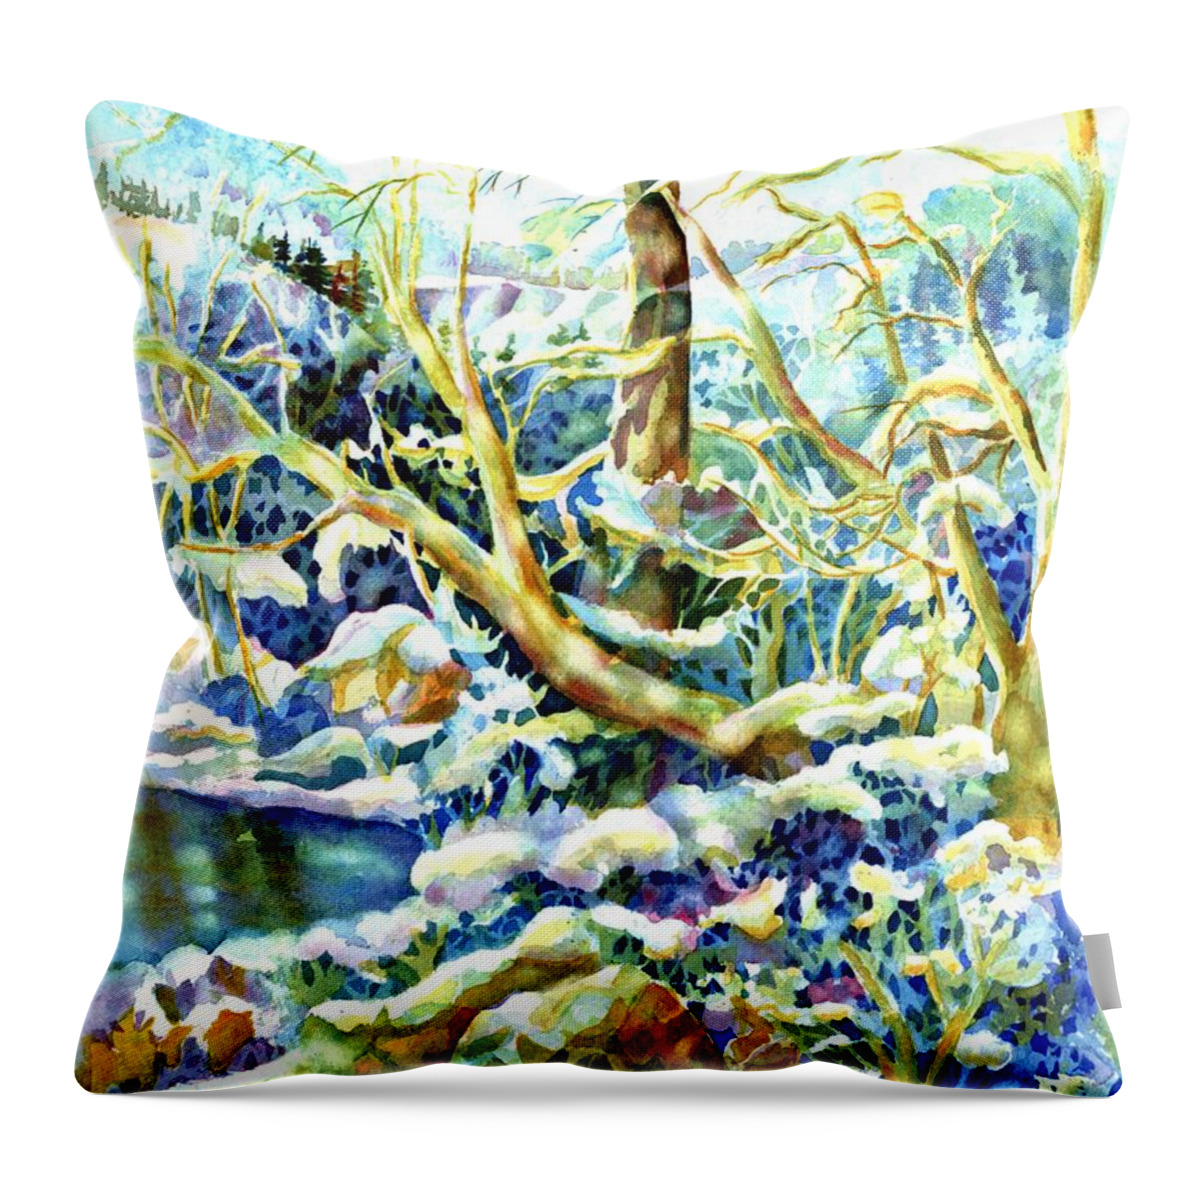 Watercolor Throw Pillow featuring the painting Winter by Ann Nicholson